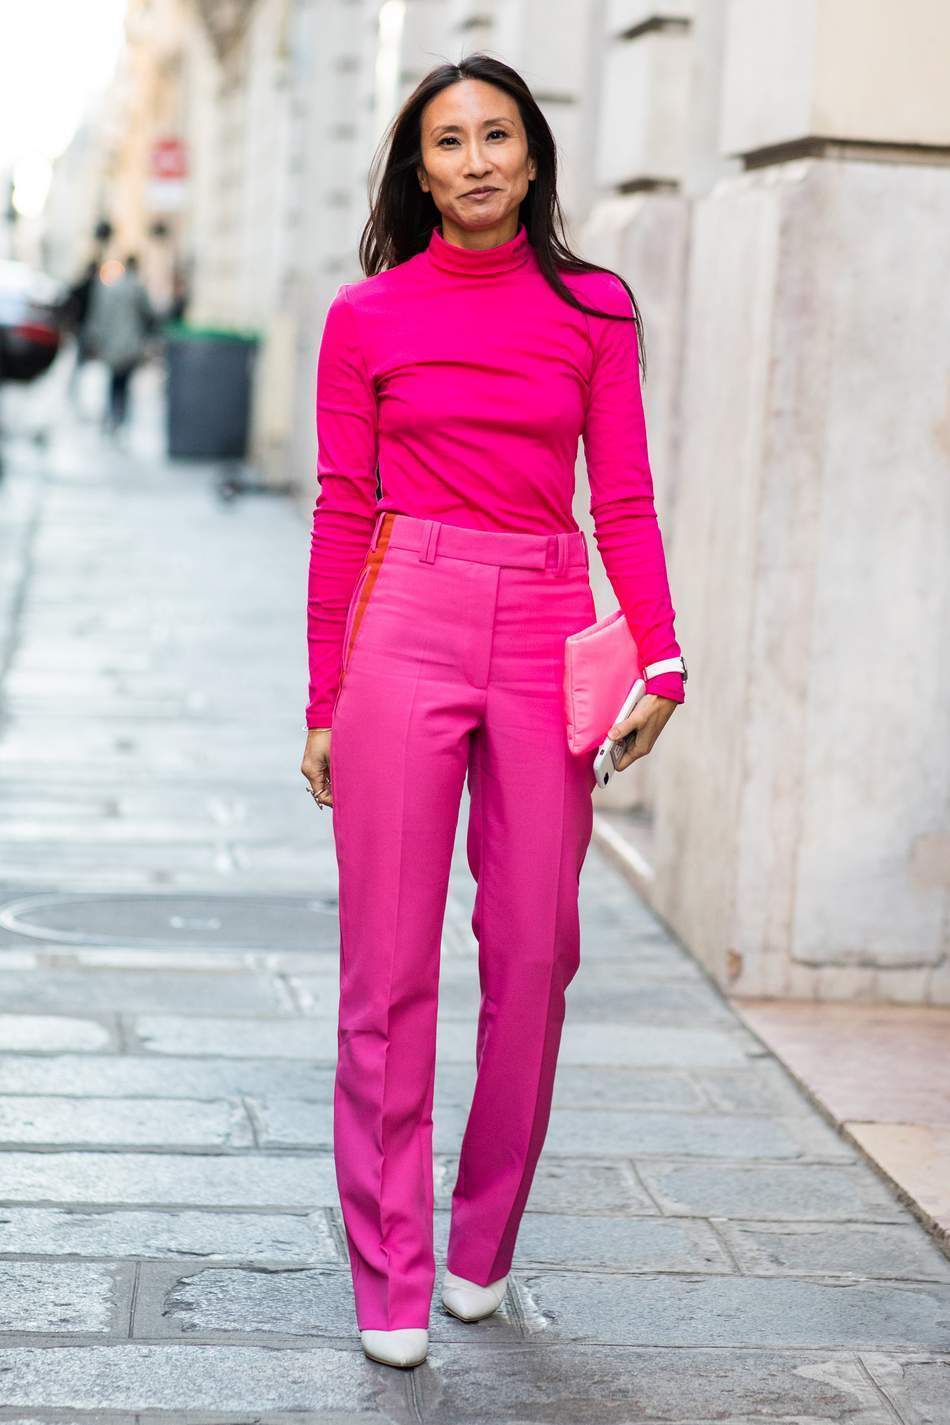 Women's Hot Pink Turtleneck, Hot Pink Dress Pants, White Leather Pumps, Hot  Pink Leather Clutch